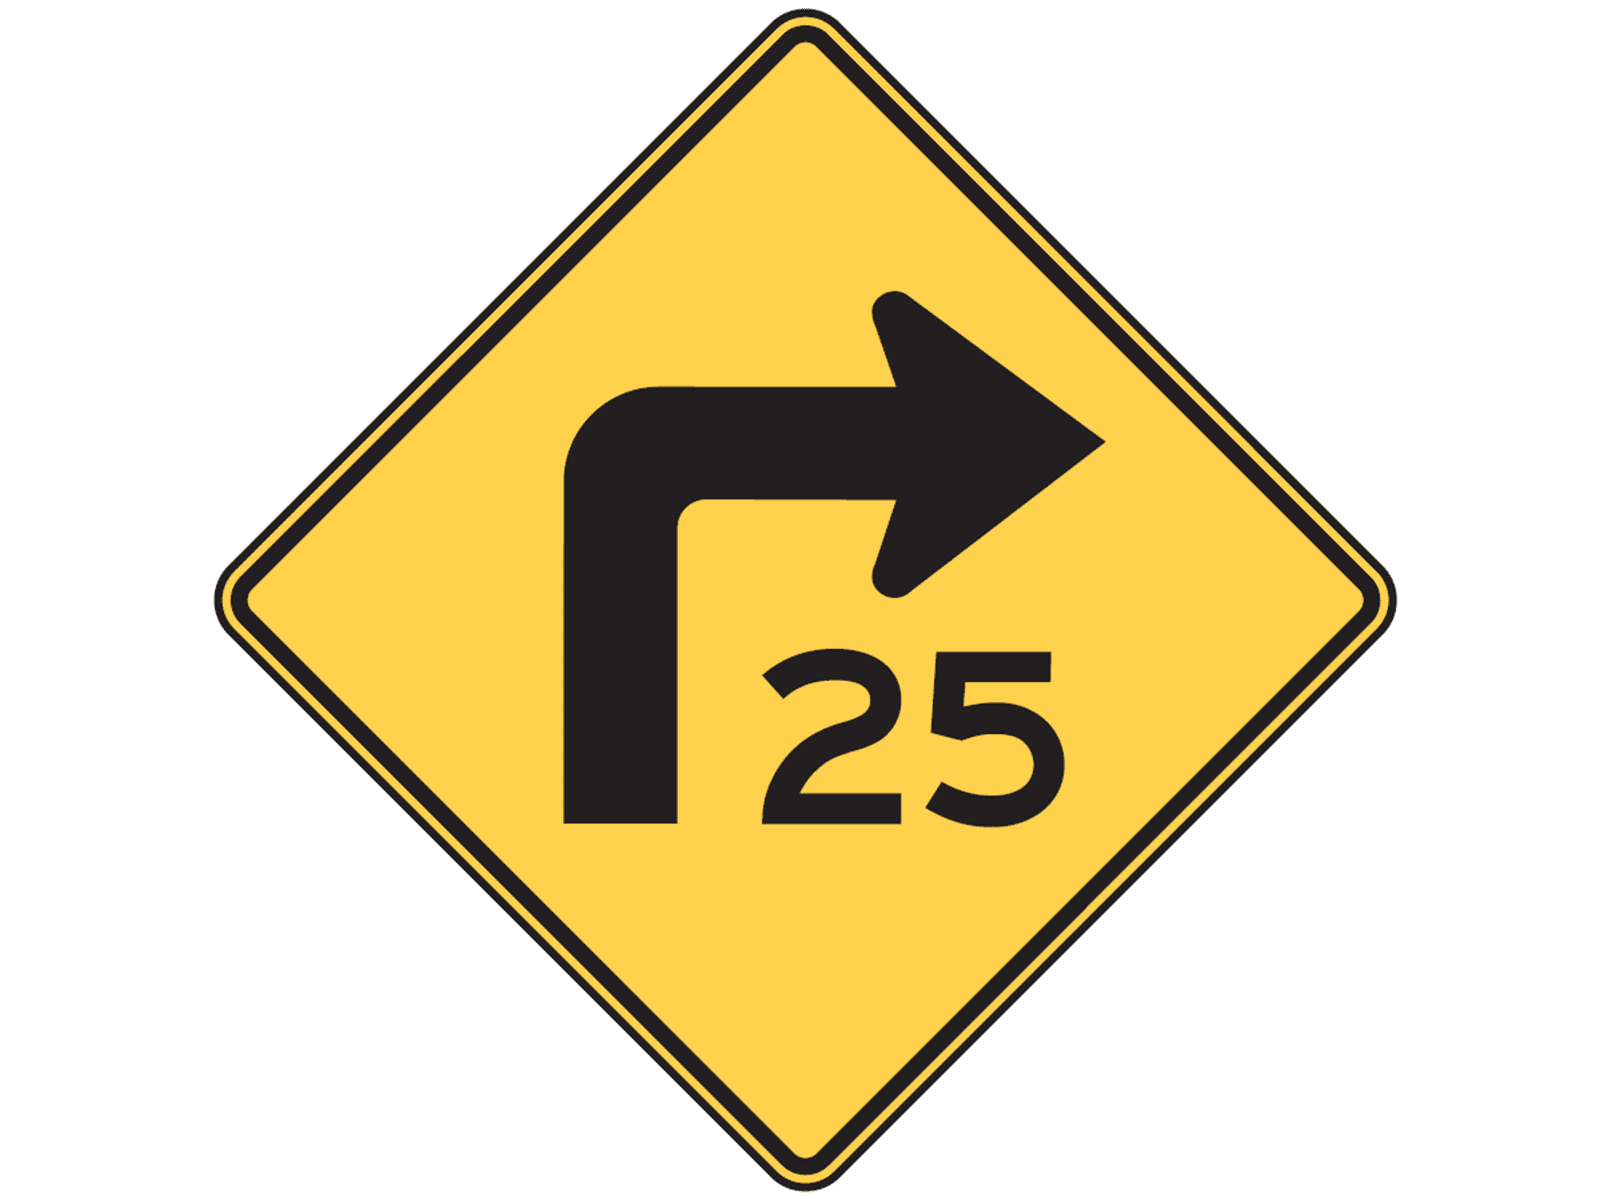 Sharp Right Turn (optional) W1-1a - W1: Curves and Turns